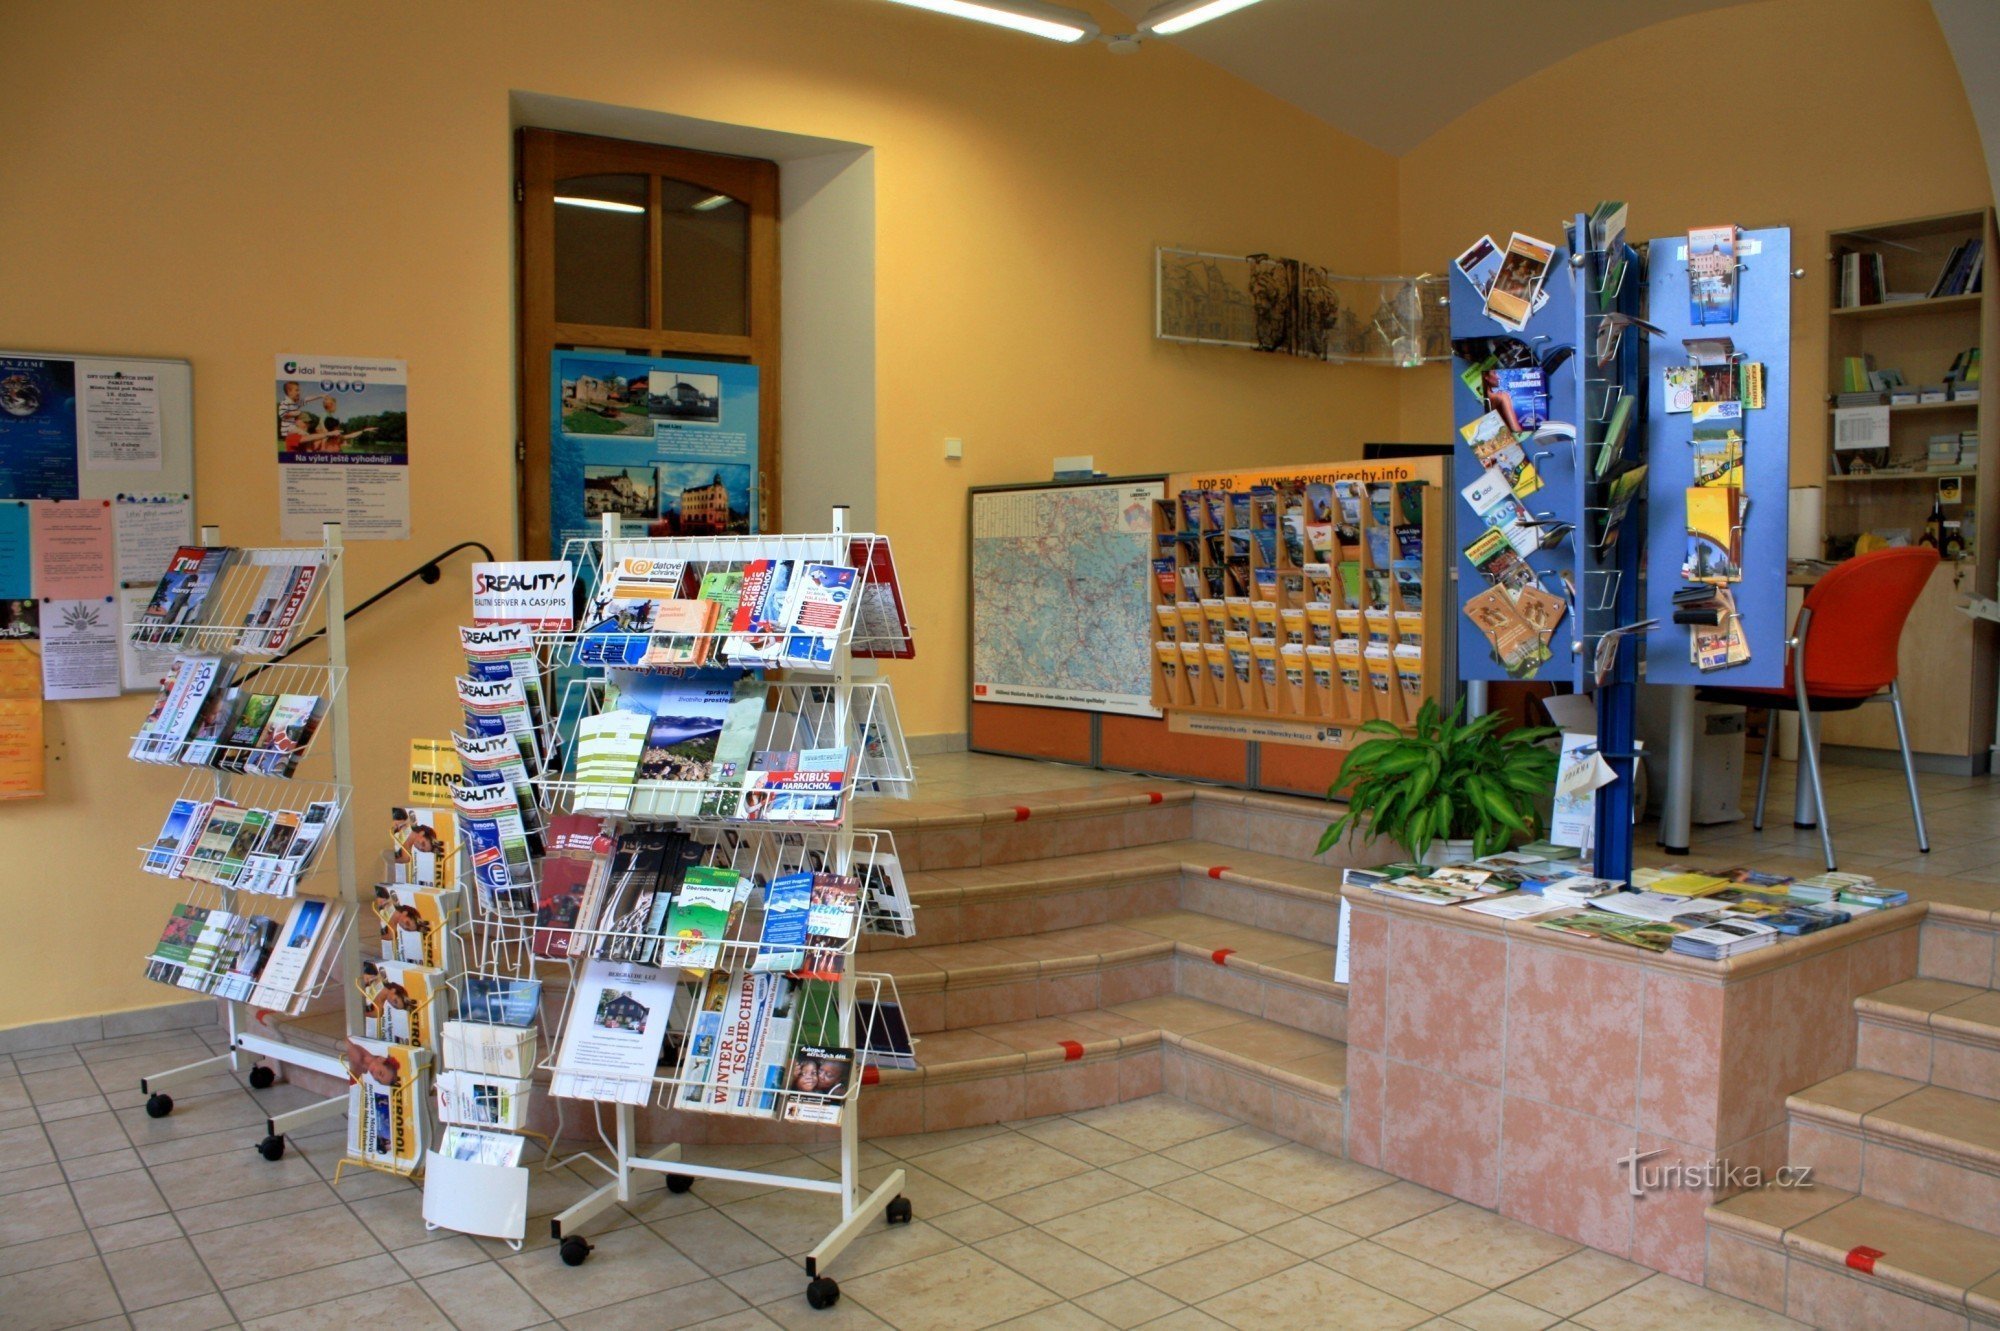 Interior of the information center